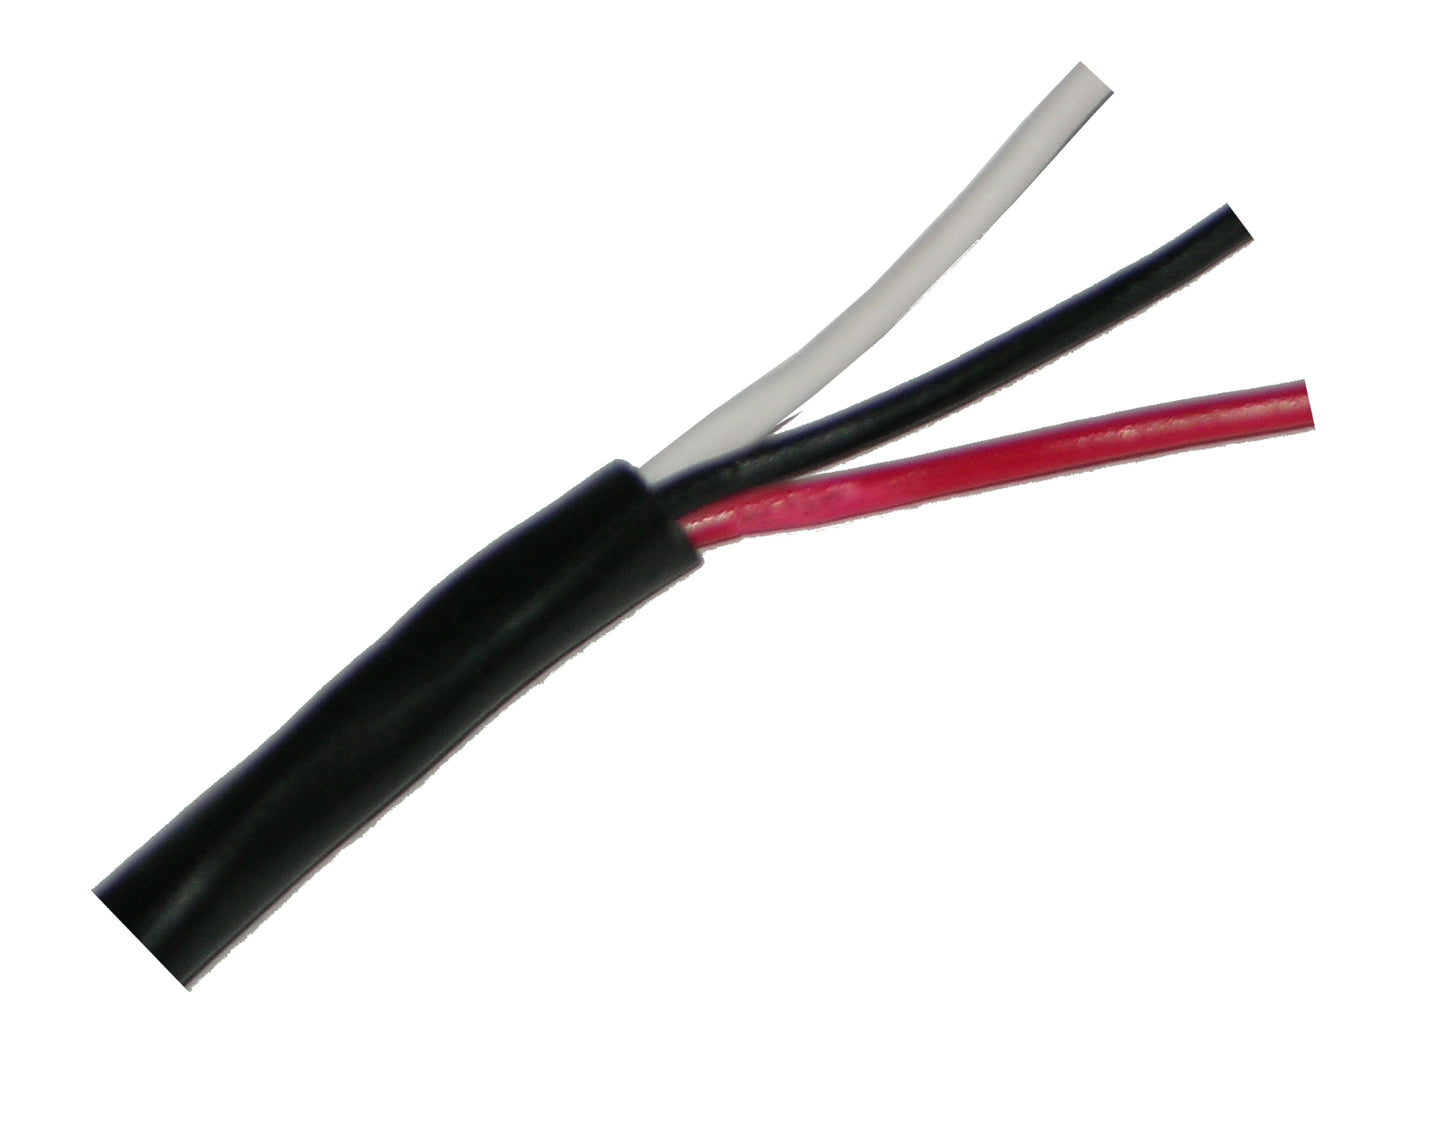 JSC 5932, Antenna Rotator Wire, 20AWG / 3 Conductor, sold by the foot or 1000' box